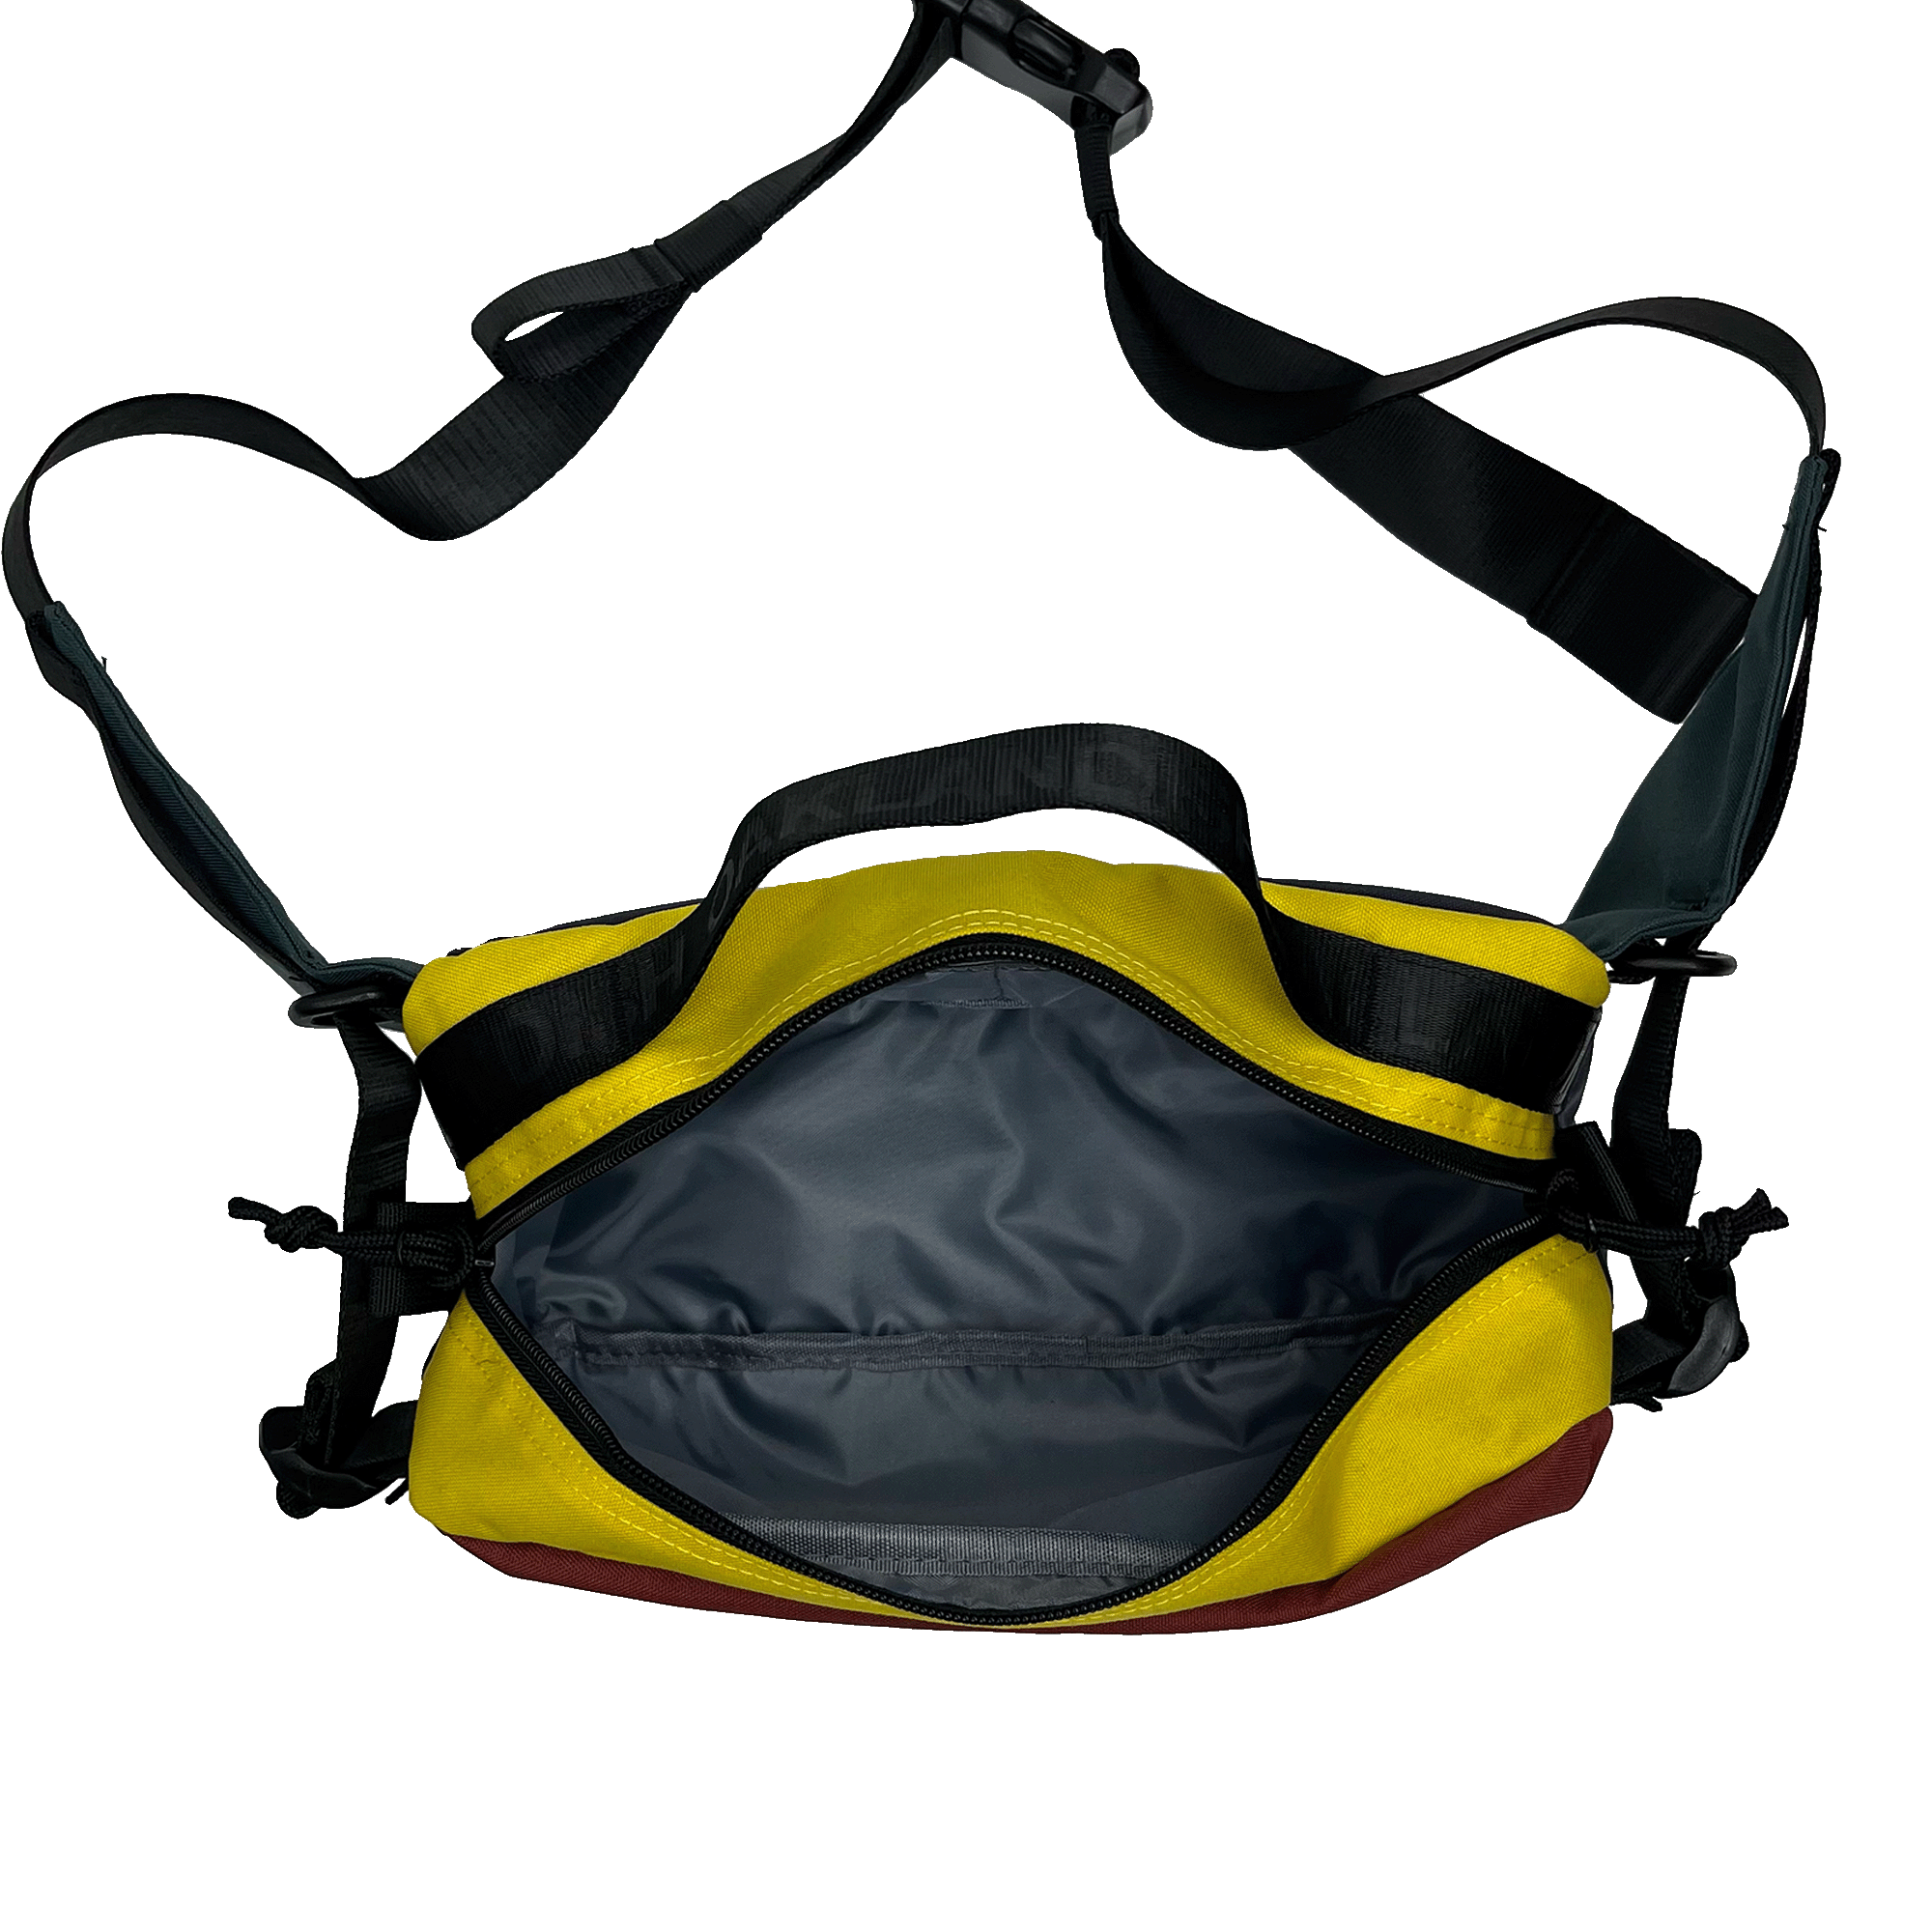 Top view of the cross-body bag with yellow color block and open zipper to reveal  nylon lined insides.